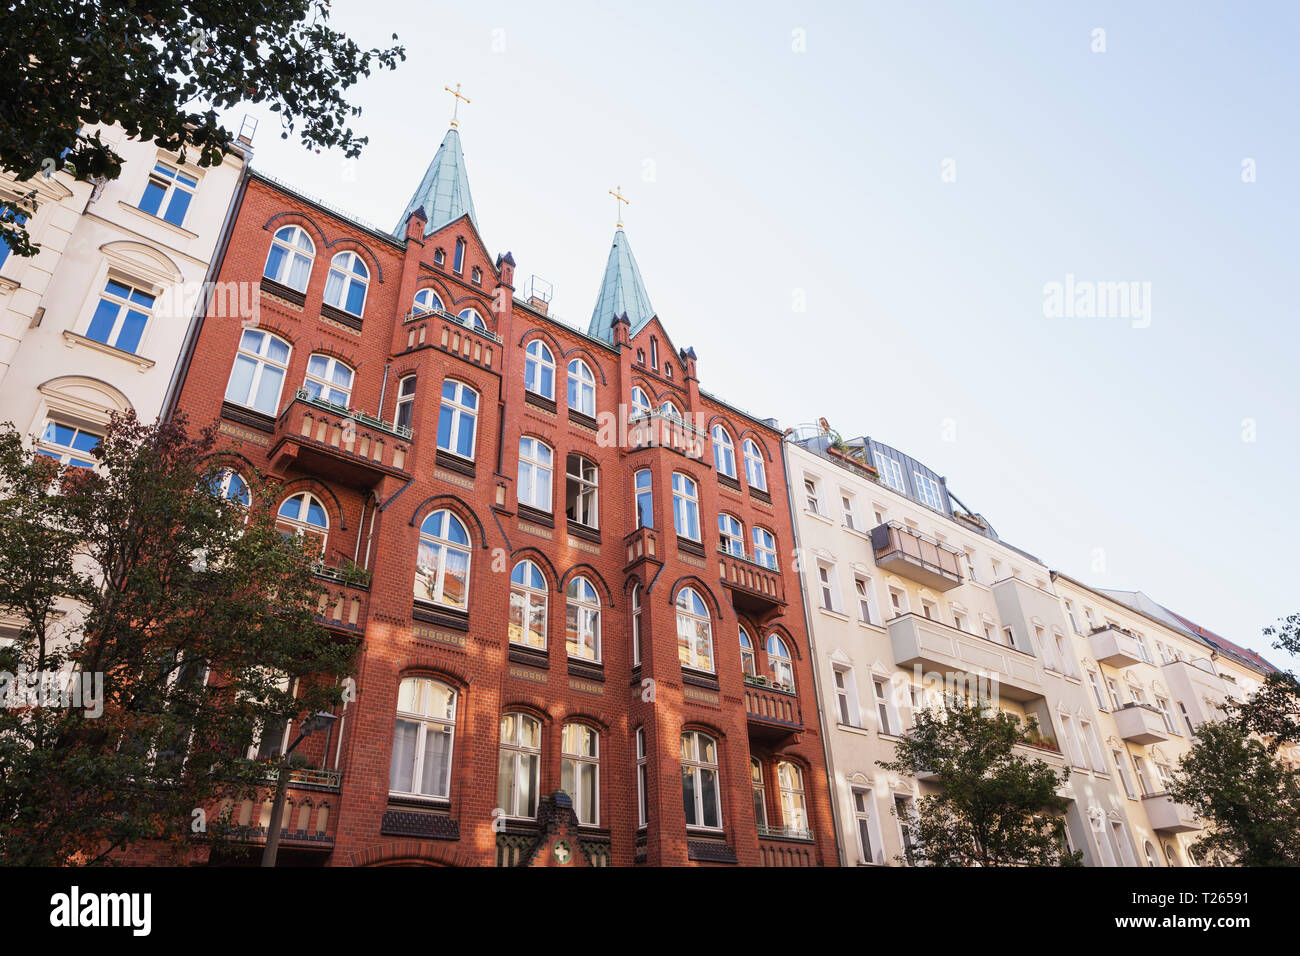 Germany, Berlin-Mitte, historical refurbished multi-family houses Stock Photo